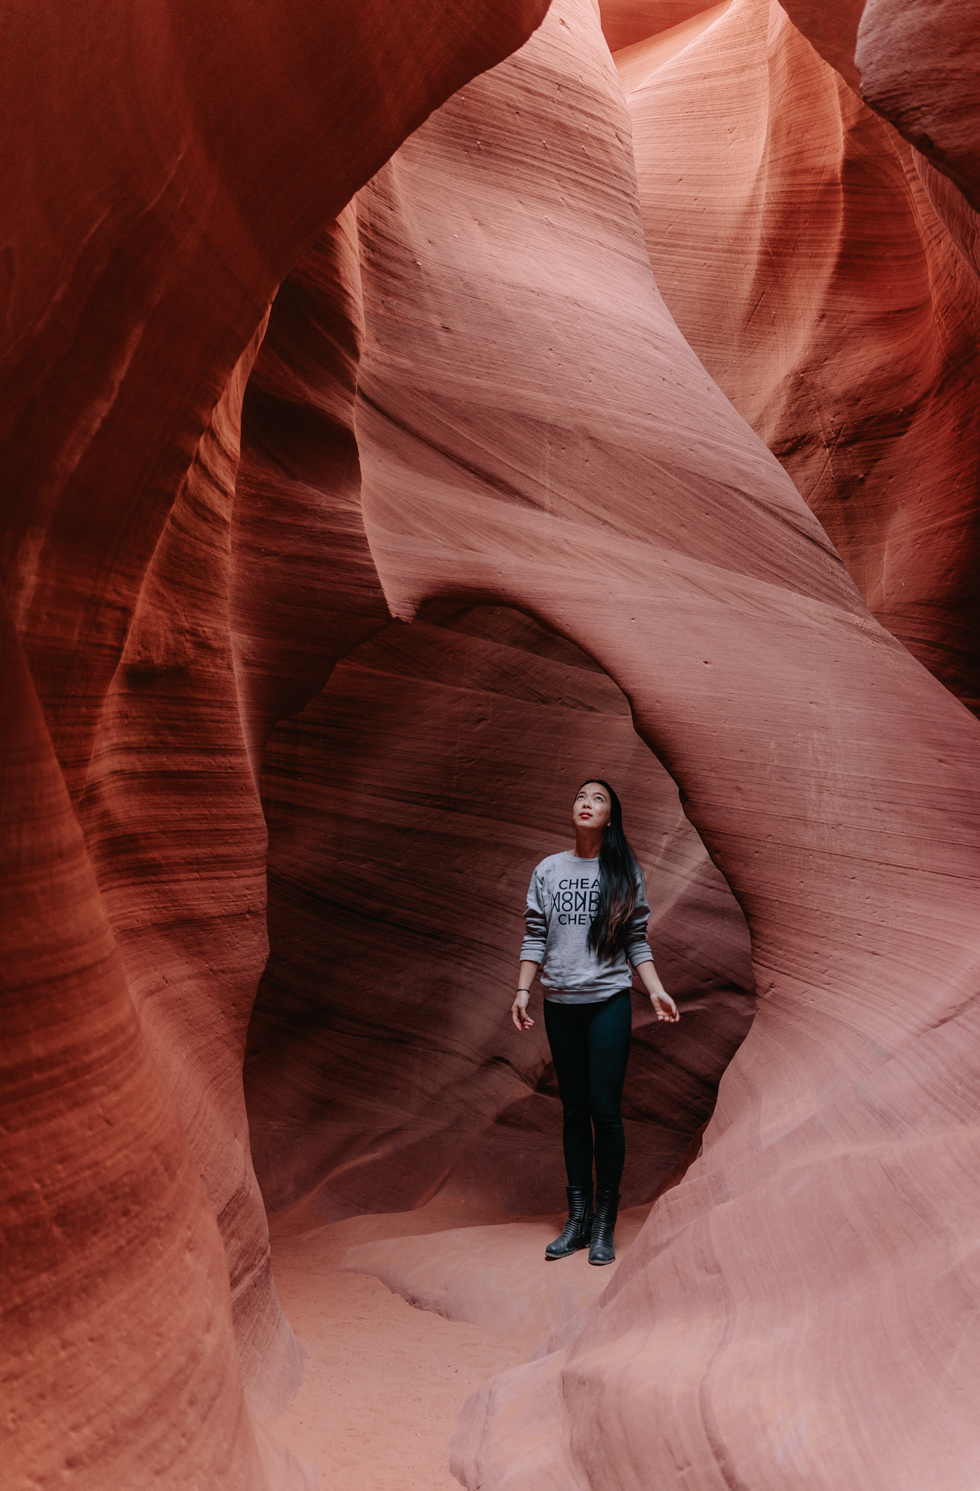 Lower Antelope Canyon | The ultimate 7-day Southwest road-trip #RoadTrip #USA - Day by day itinerary and the best parks to visit in Utah, Nevada, and Arizona